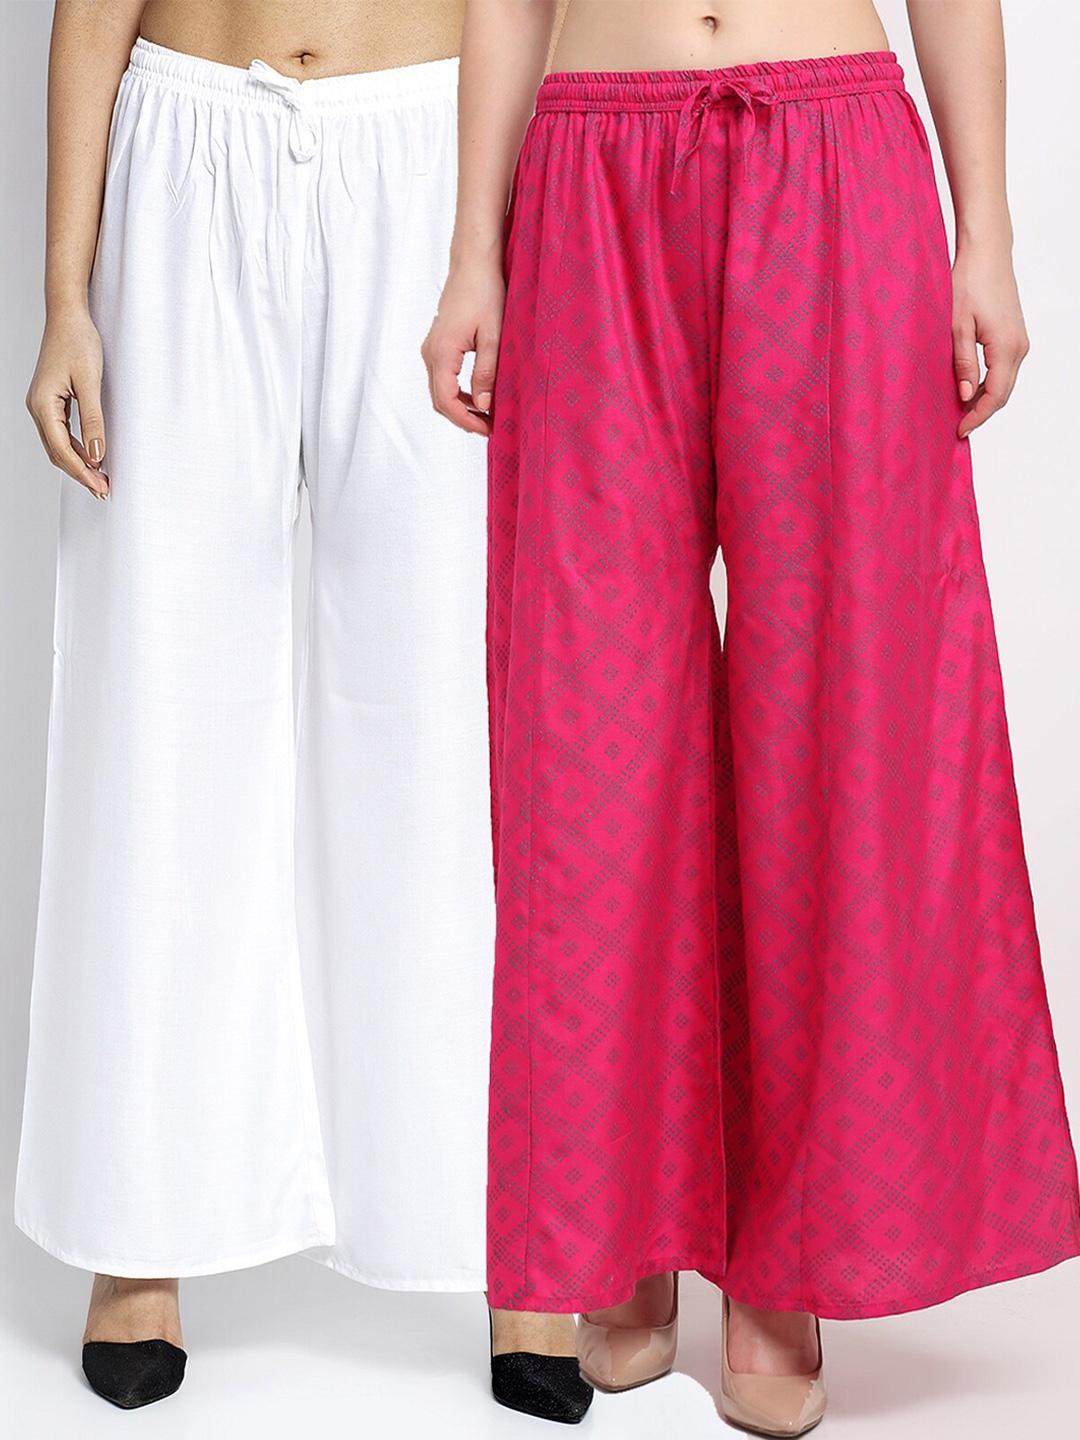 gracit women pack of 2 white & pink printed flared knitted ethnic palazzos